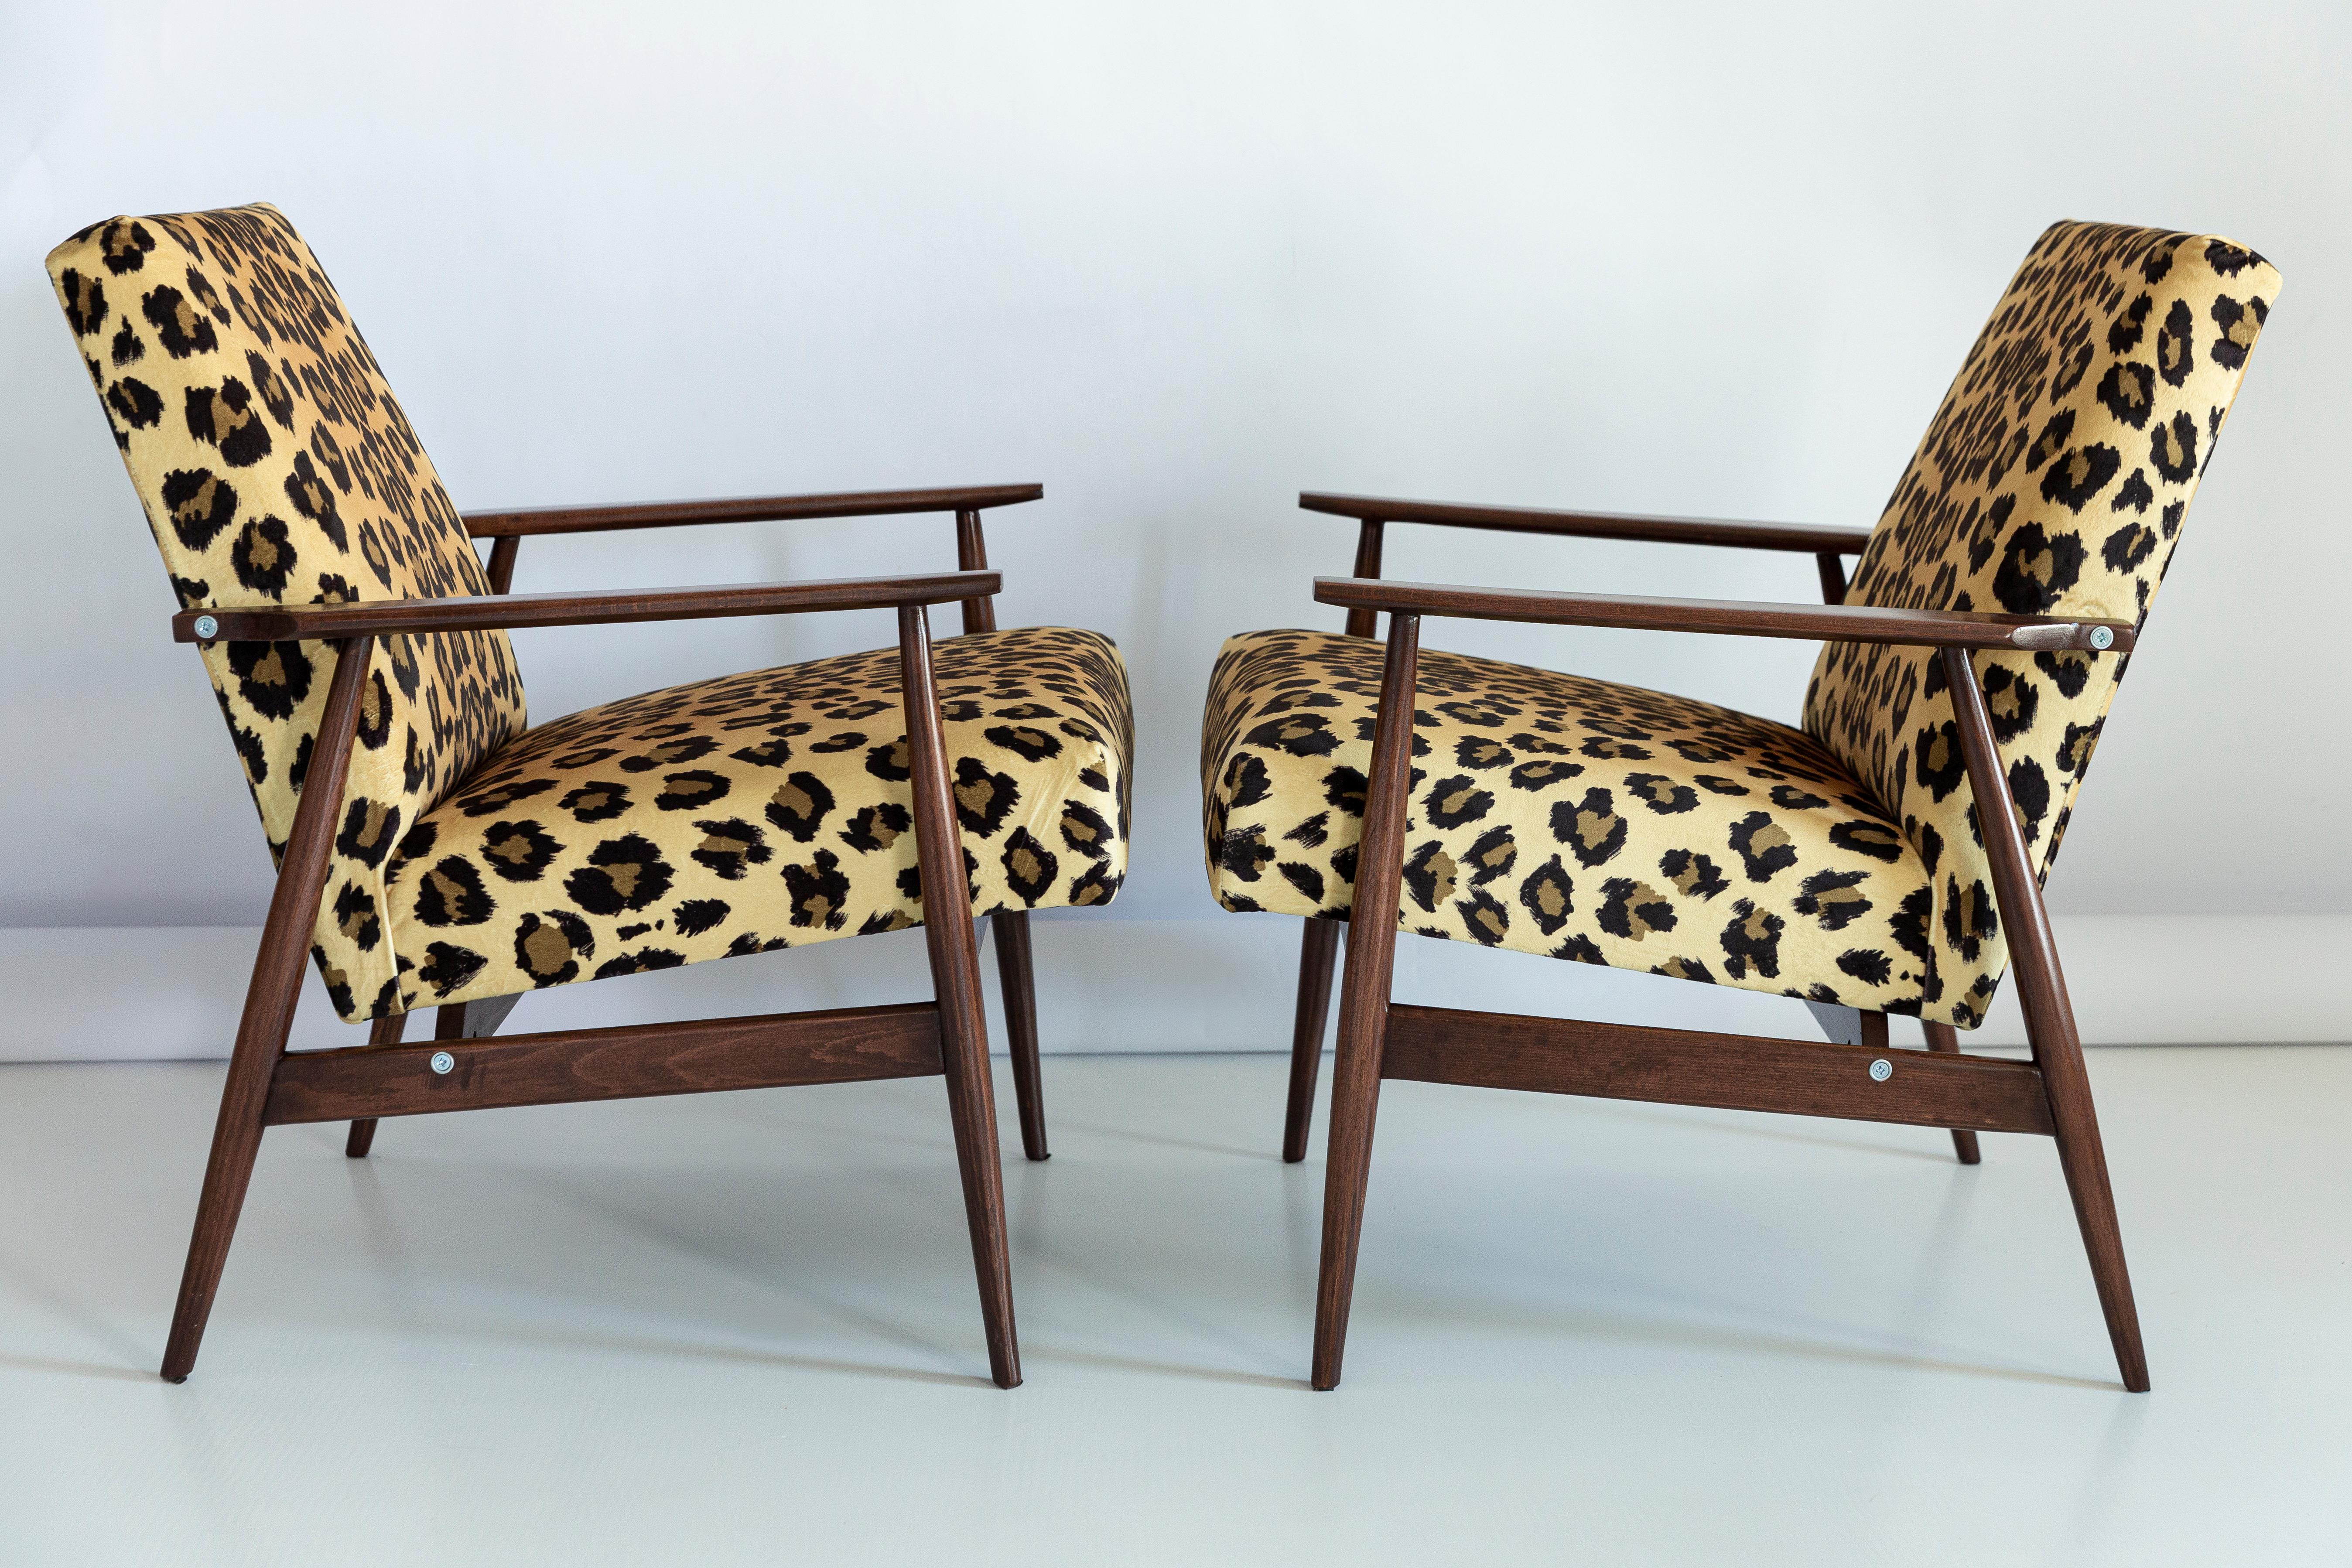 Set of six beautiful, restored armchairs designed by Henryk Lis. Furniture after full carpentry and upholstery renovation. The fabric, which is covered with a backrest and a seat, is a high-quality Italian velvet upholstery printed in leopard